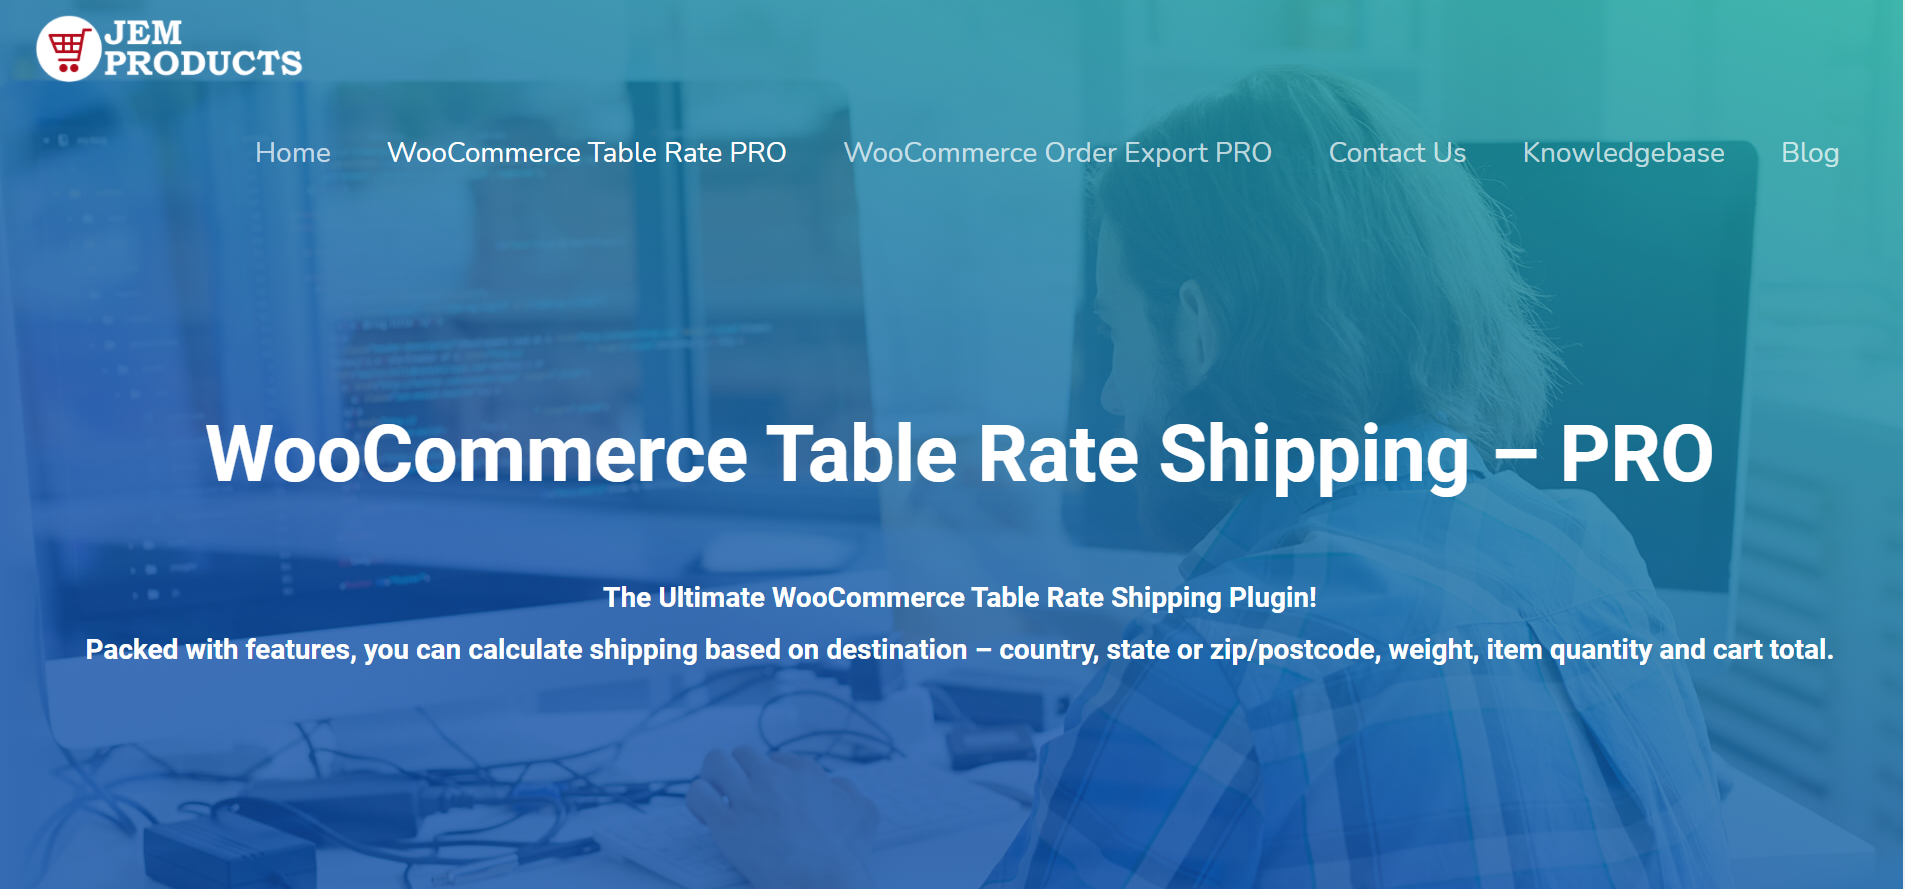 WooCommerce Table Rate Shipping website